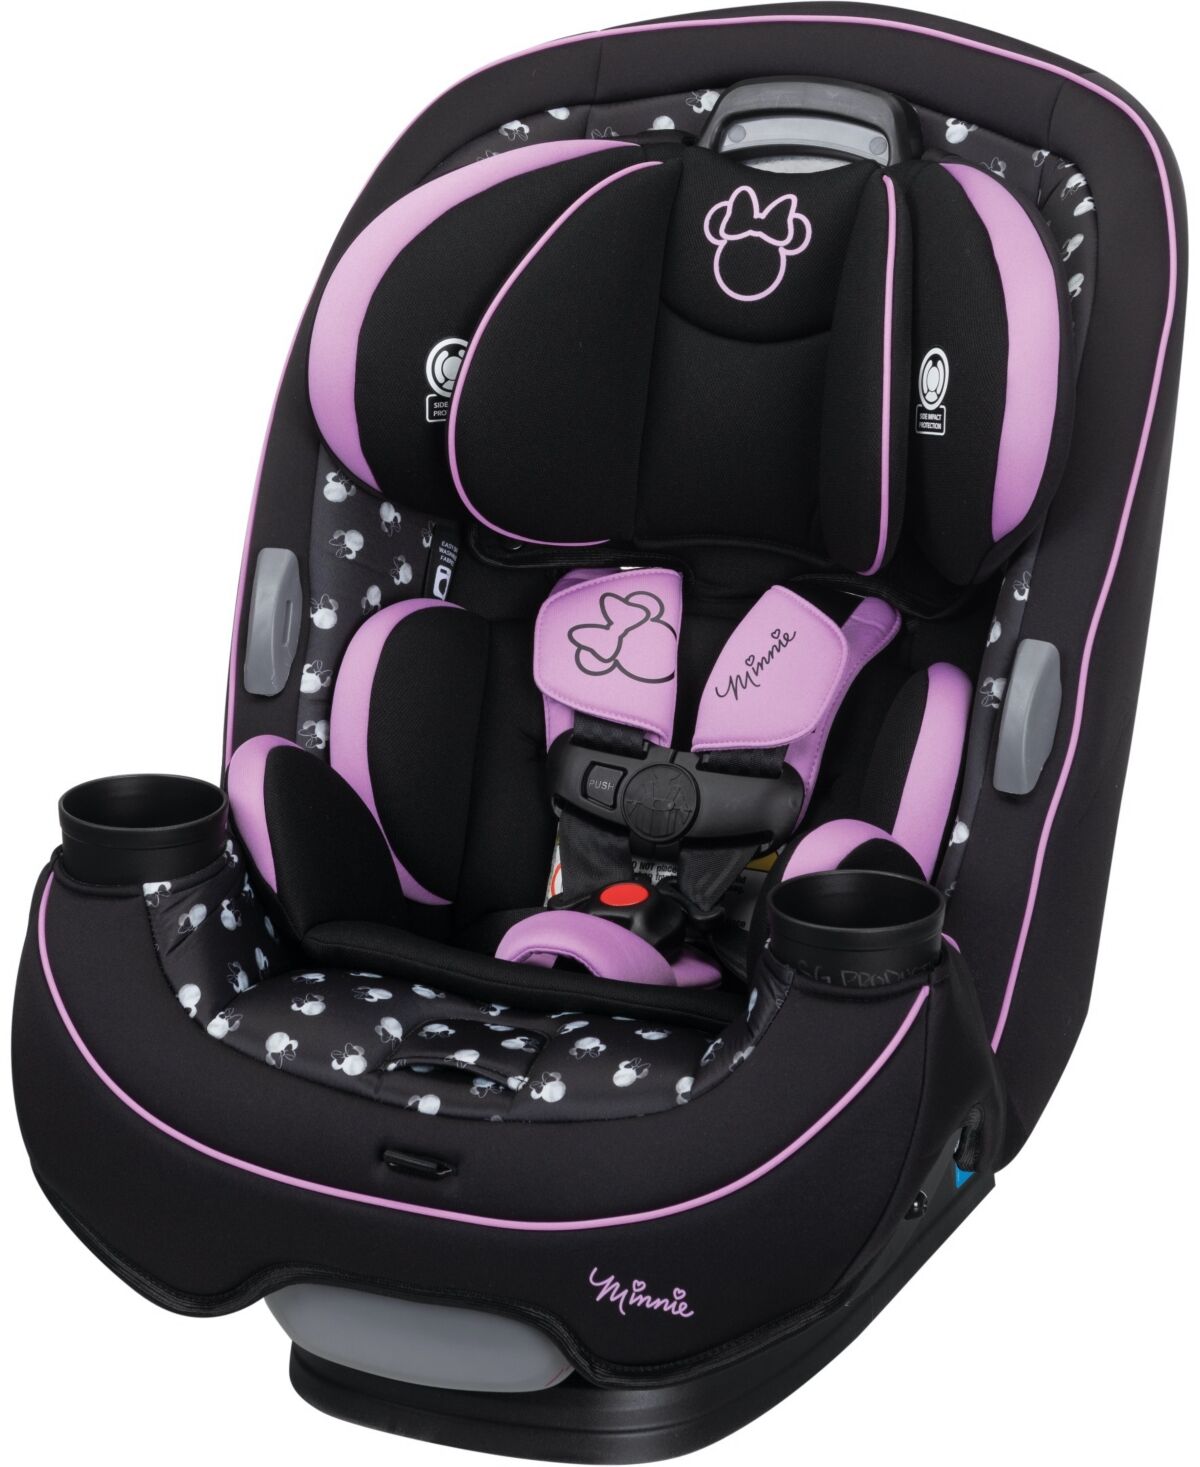 Disney Baby Grow and Go 3-in-1 Convertible One-Hand Adjust Car Seat - Midnight Minnie